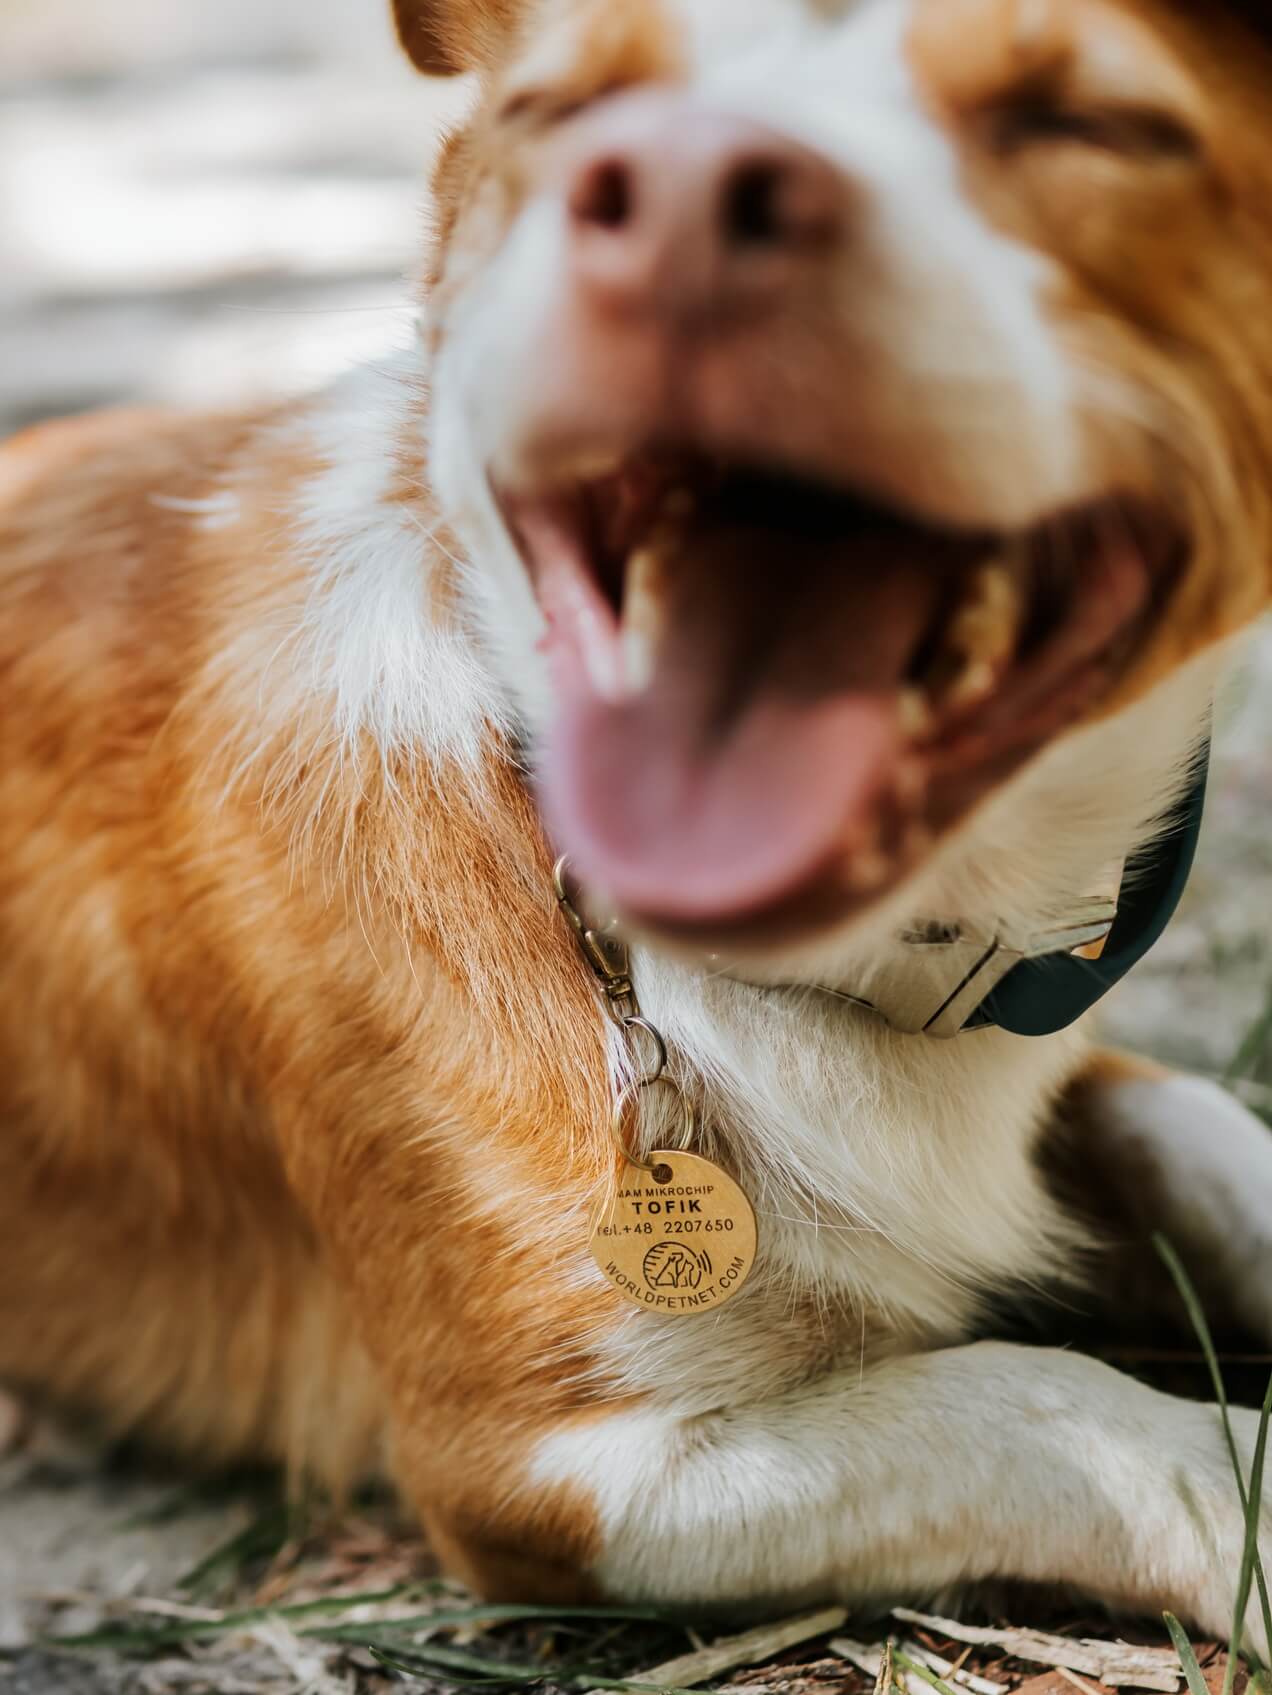 A pendant with a QR code for animals